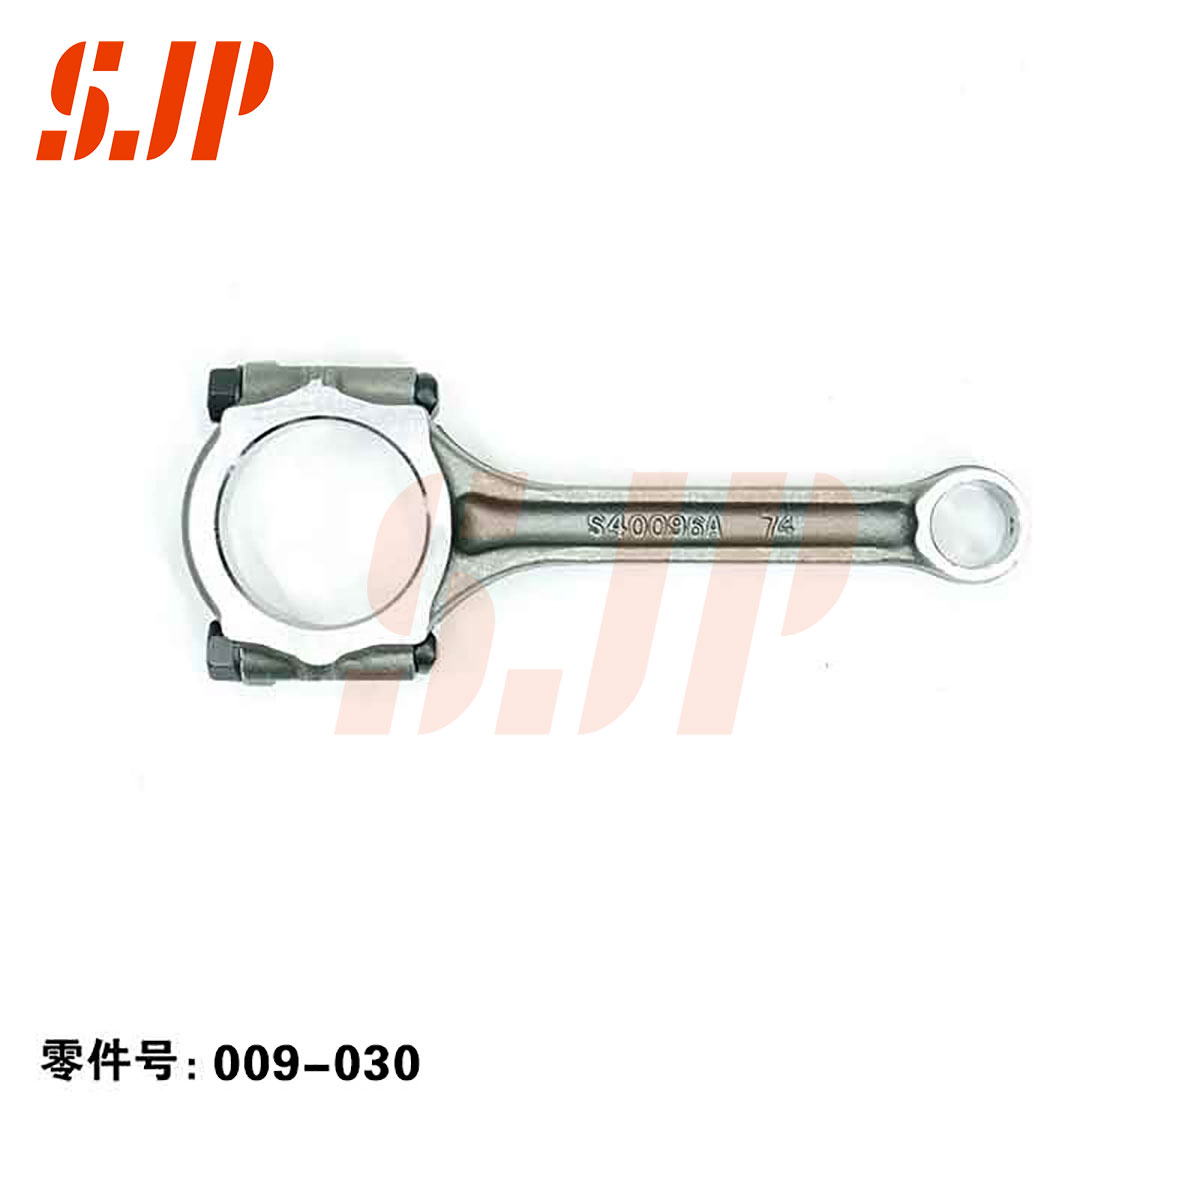 SJ-009-030 Connecting Rod For Alsvin 475